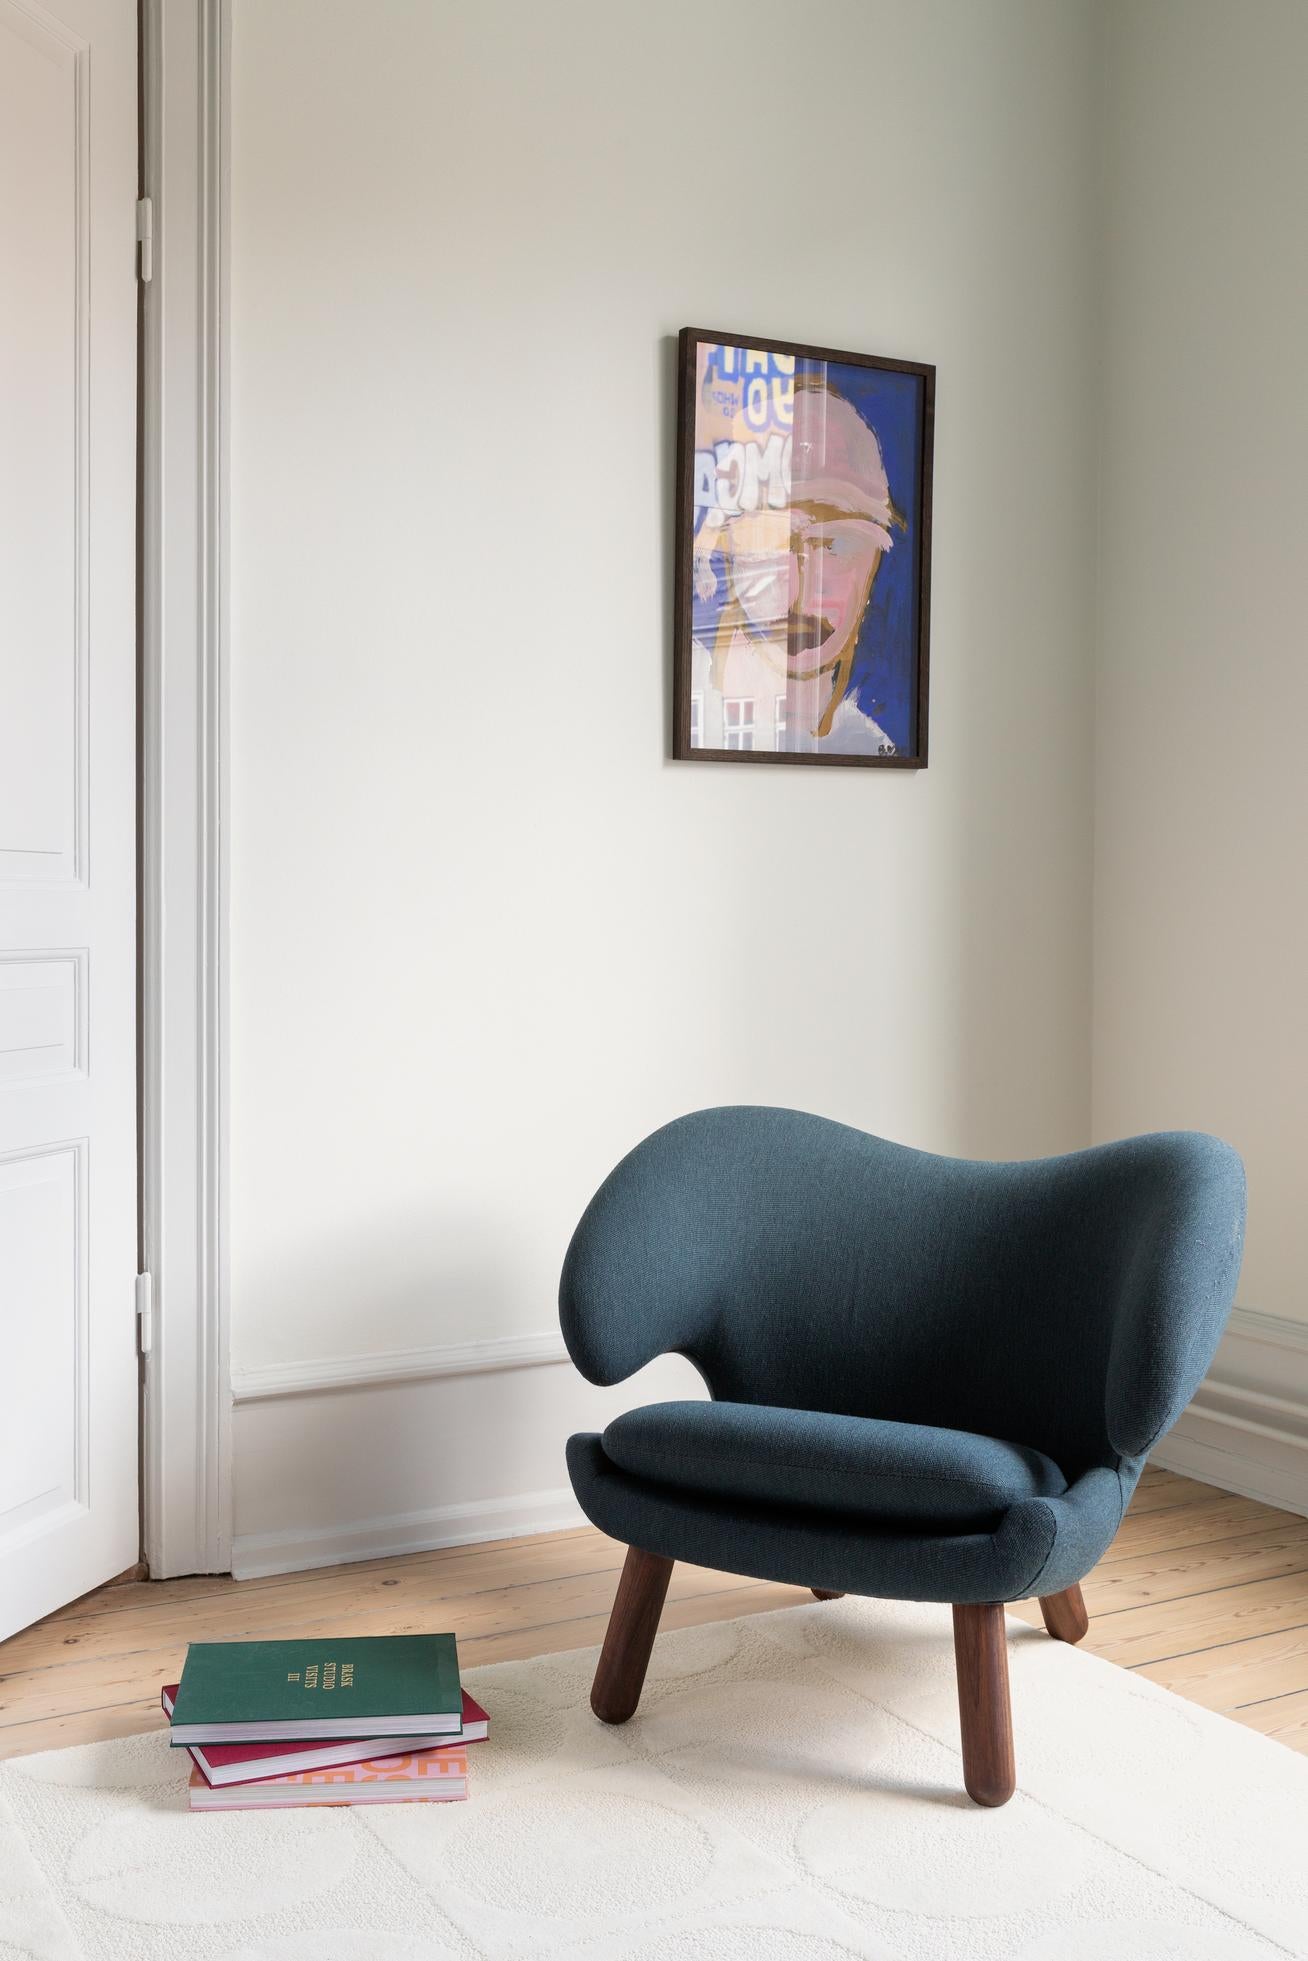 Finn Juhl Pelican Chair Upholstered in Wood and Fabric 13